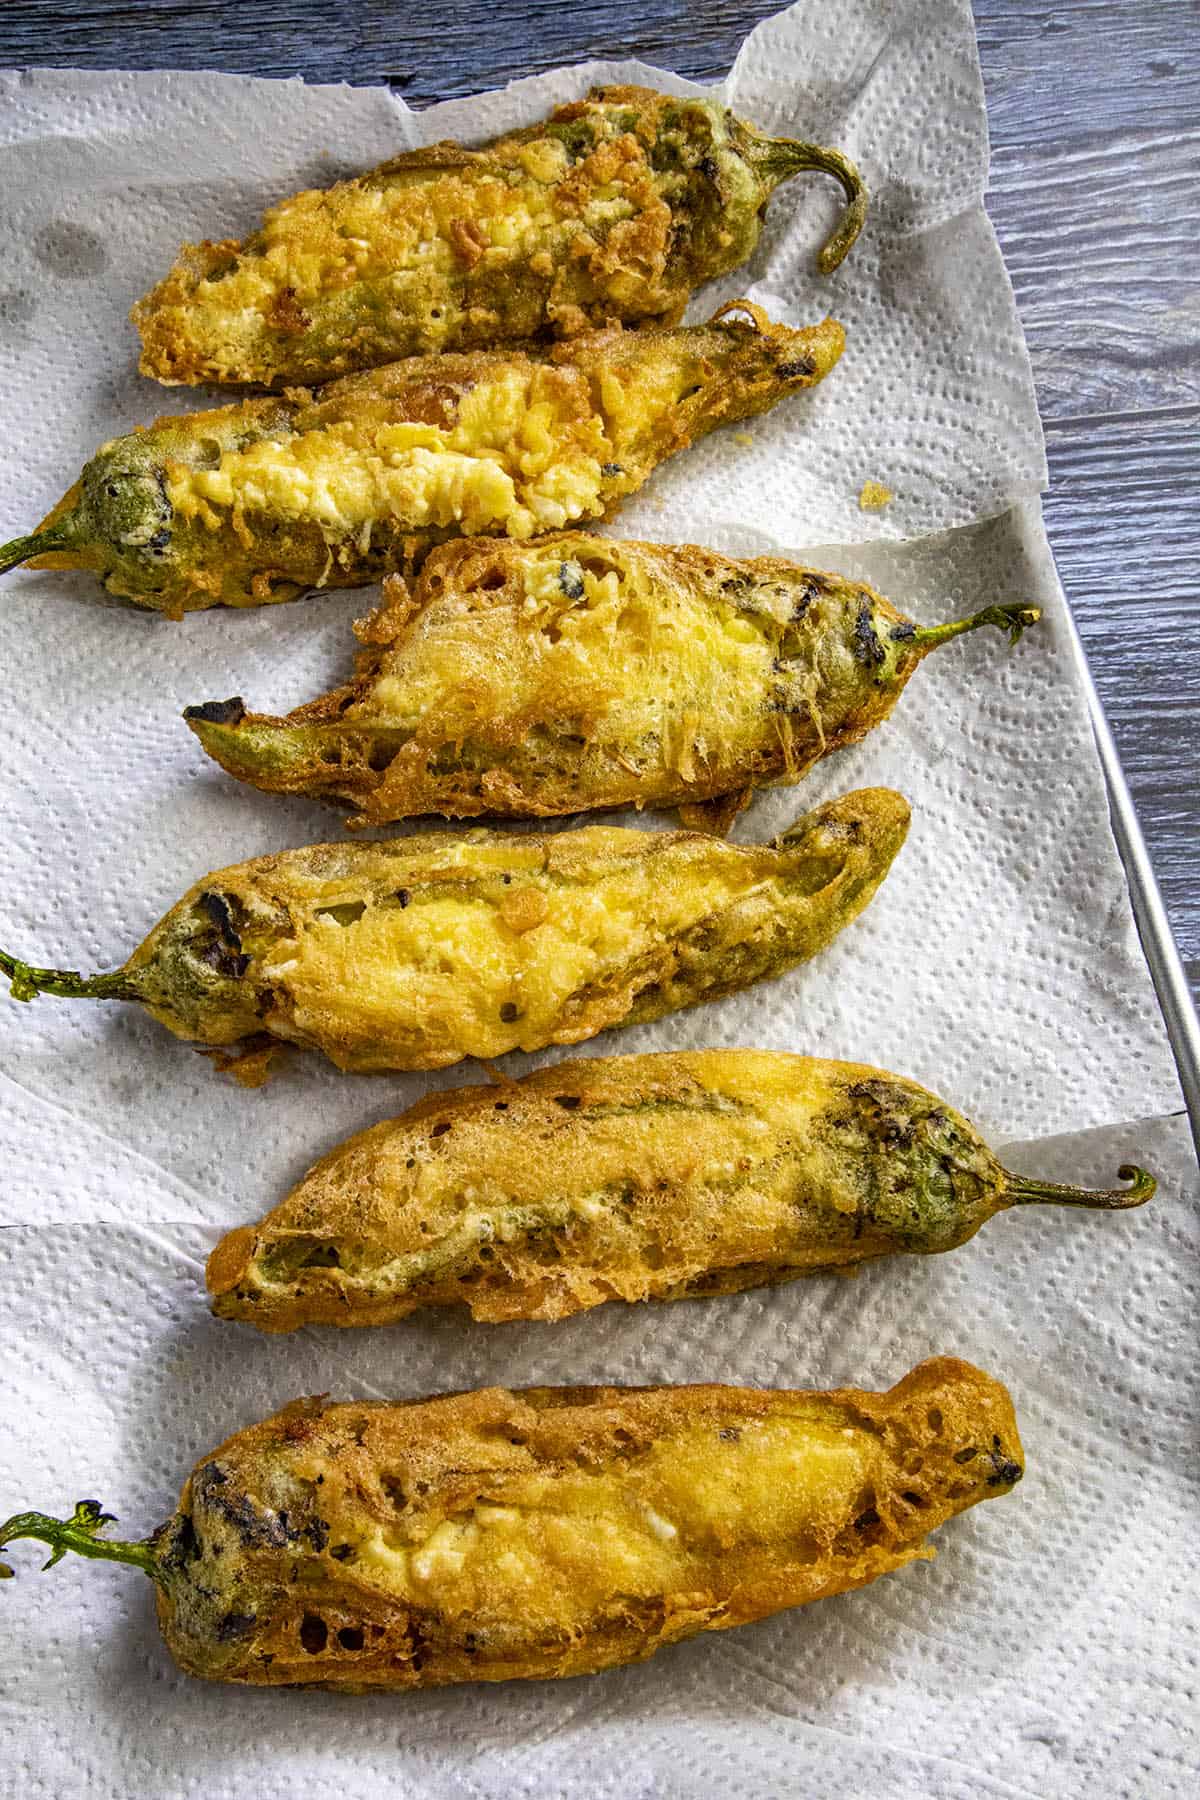 Chiles rellenos just out of the fryer, draining on paper towels